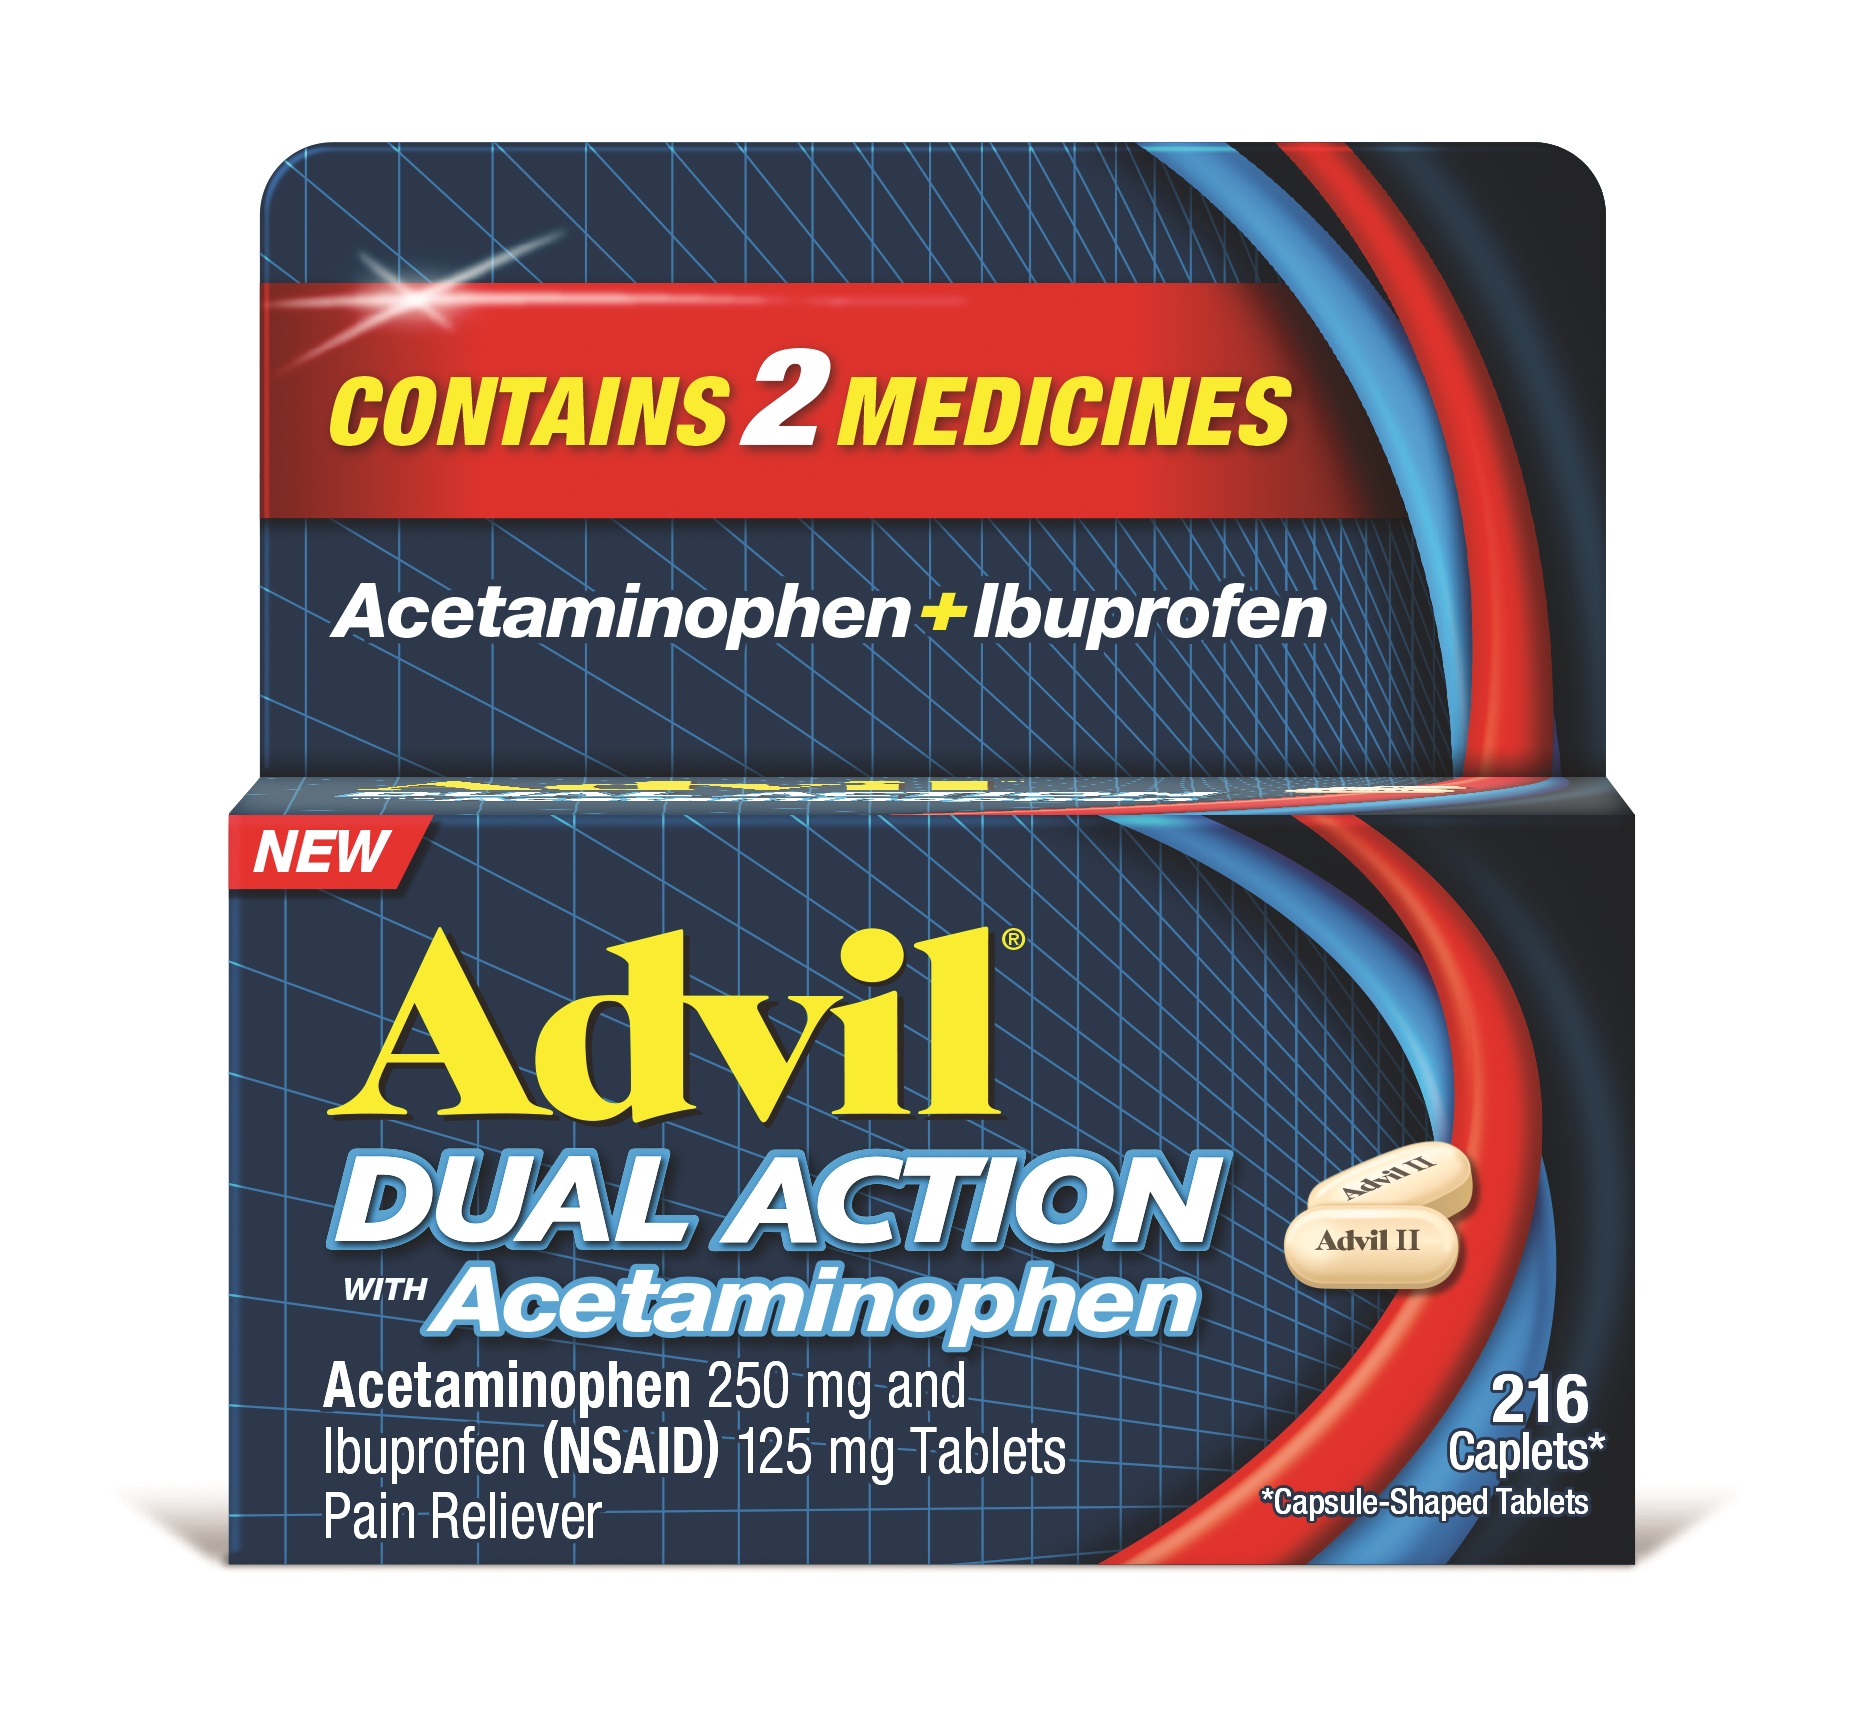 Advil Dual Action Coated Caplets with Acetaminophen, 250 Mg Ibuprofen and 500 Mg Acetaminophen Per Dose (2 Caplet Equivalent) for 8 Hour Pain Relief - 216 Count - image 1 of 6